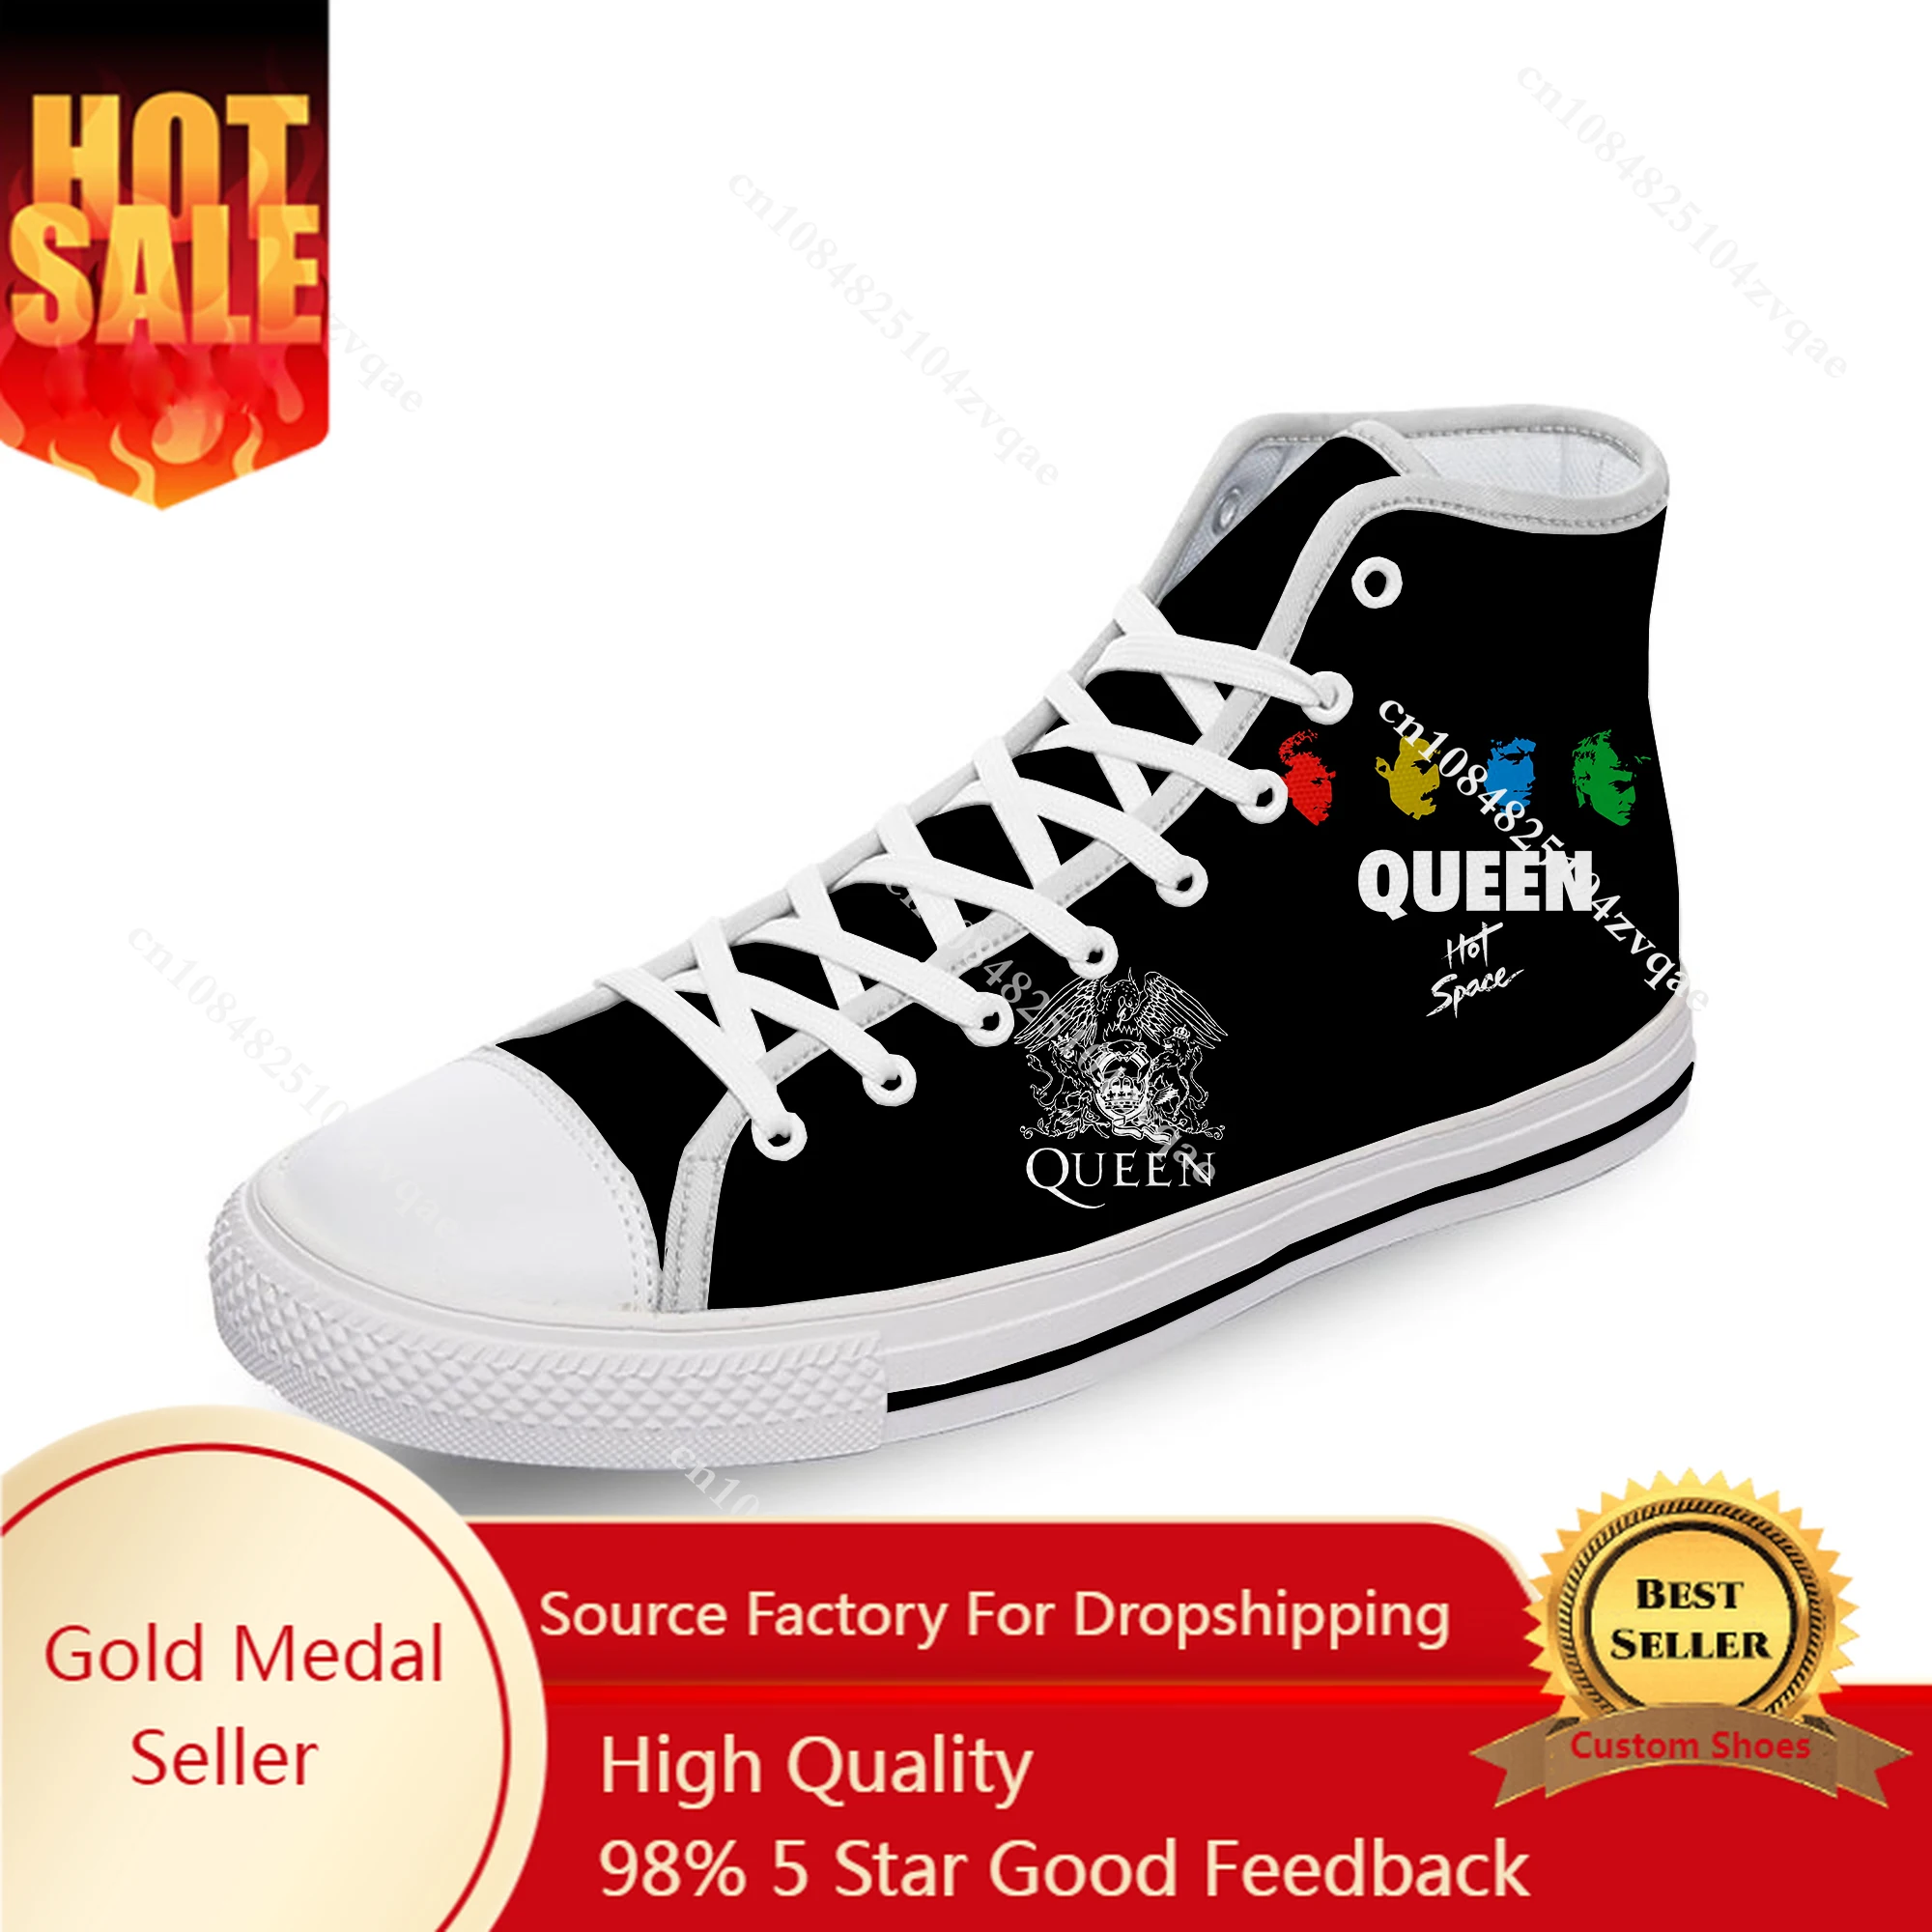 

Queen Freddie Mercury Rock Band White Cloth 3D Print High Top Canvas Fashion Shoes Men Women Lightweight Breathable Sneakers